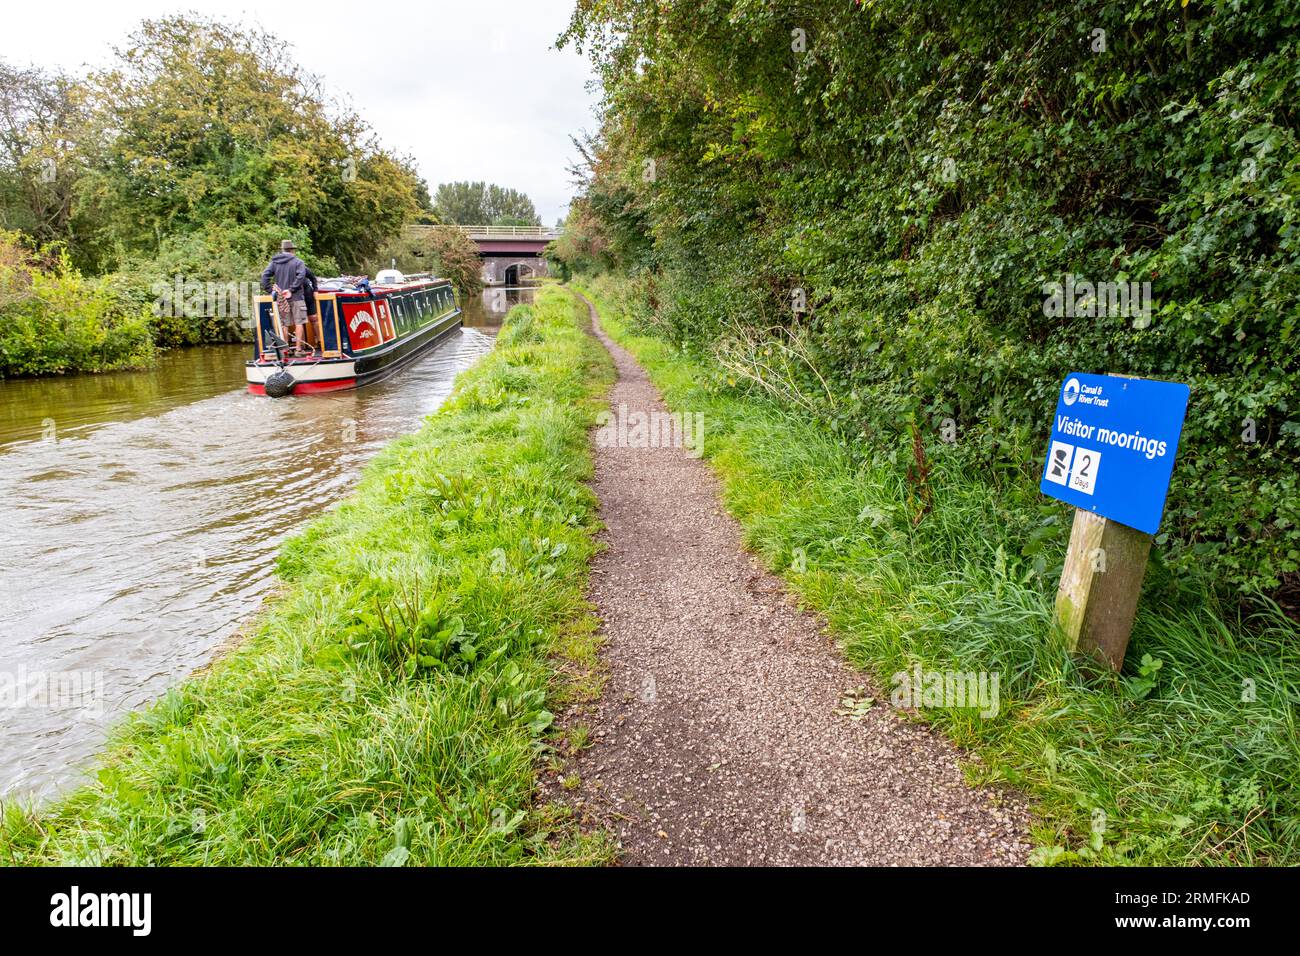 Canal & River trust sign, 2 days visitor moorings in Wheelock near Sandbach Cheshire UK Stock Photo